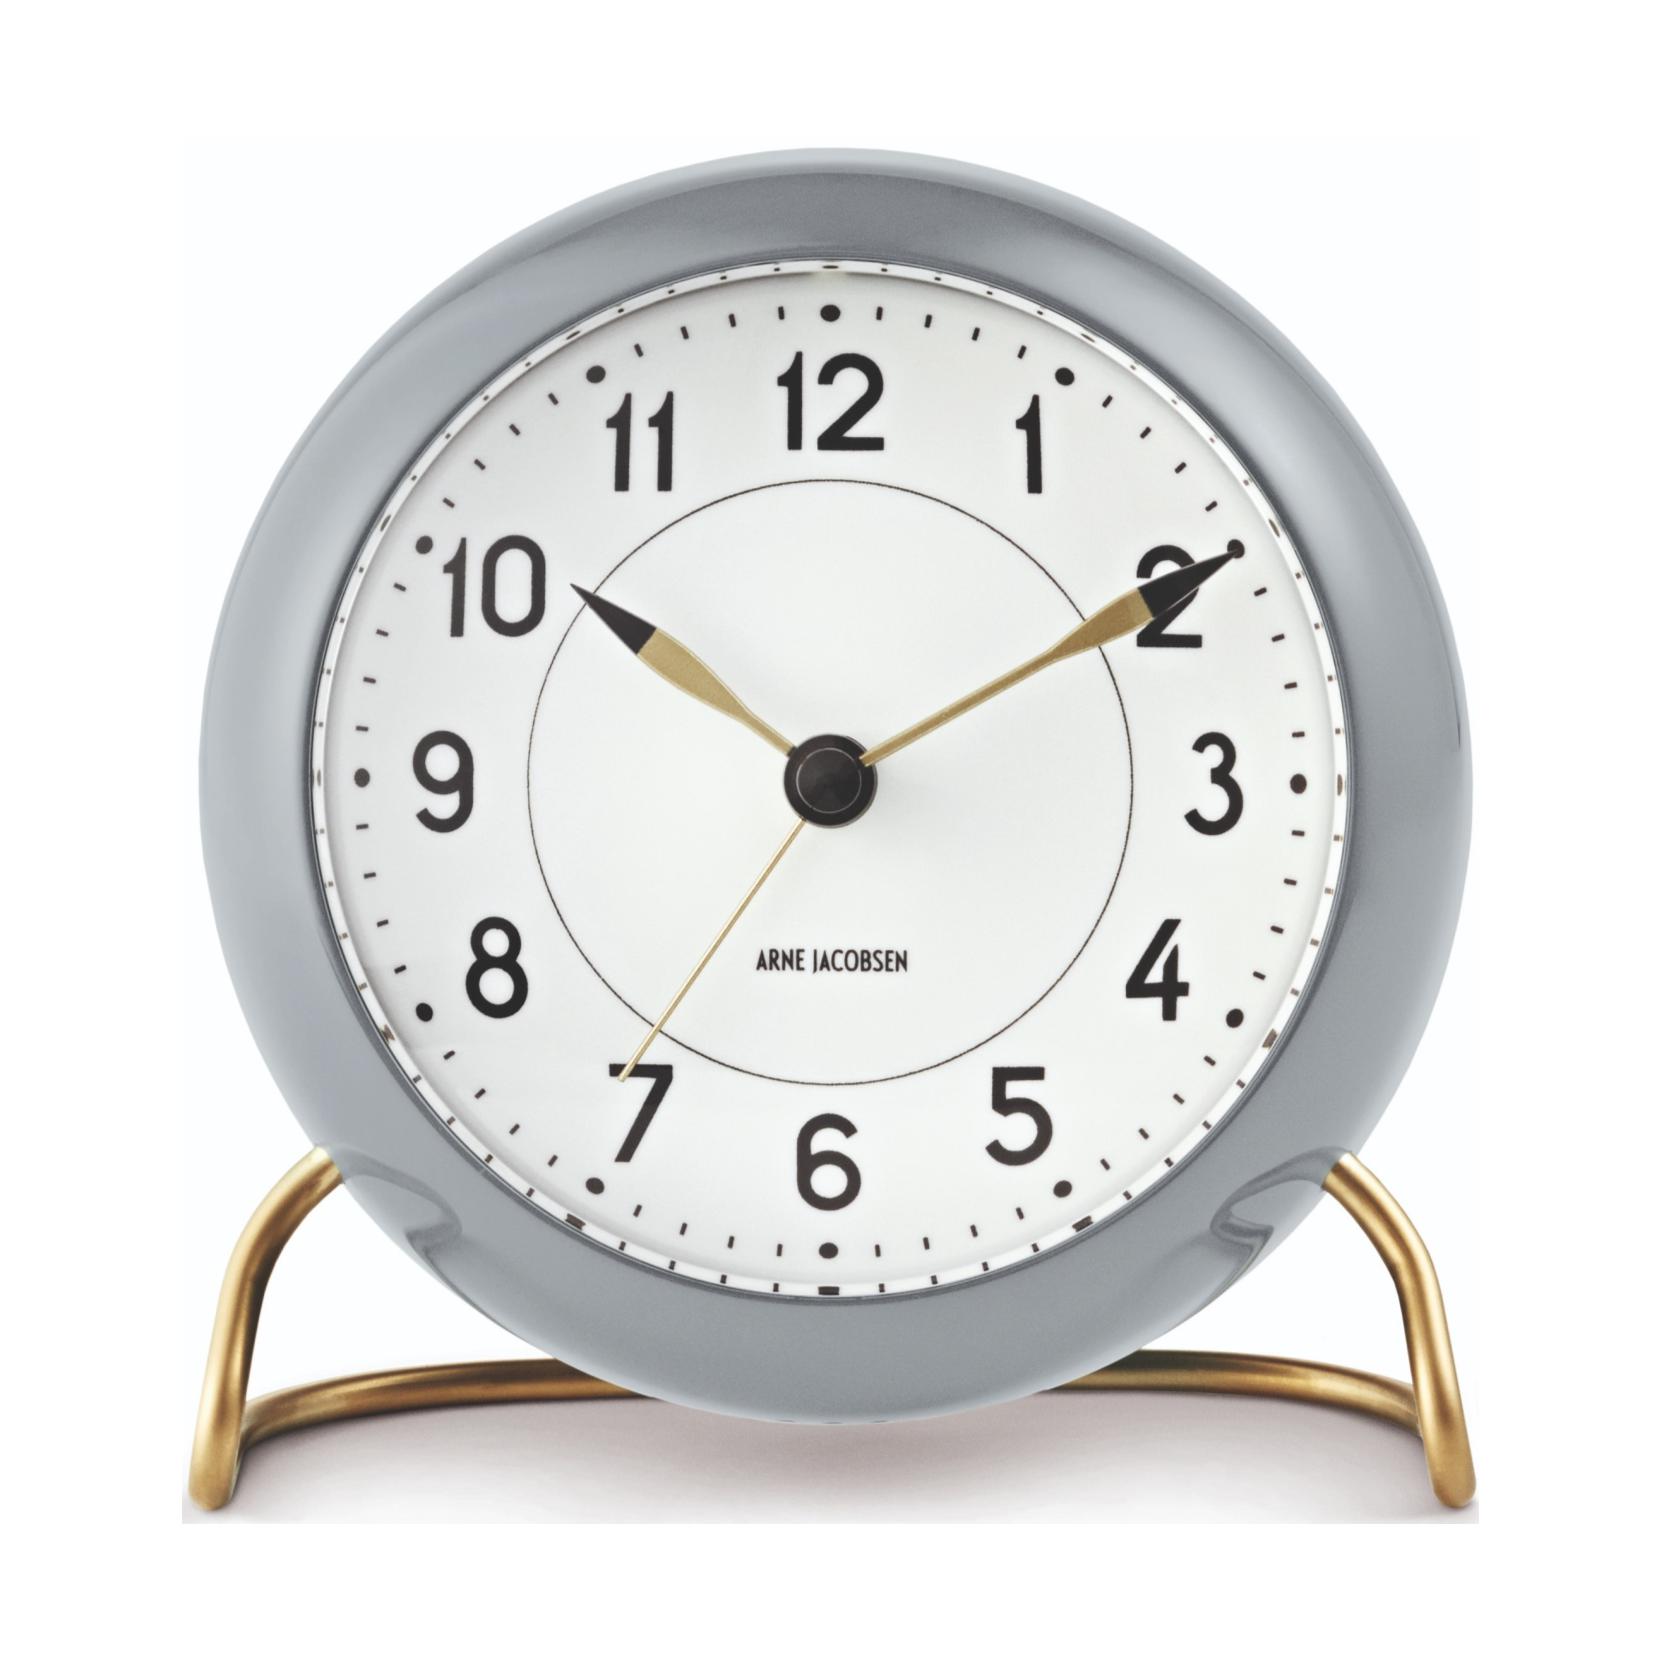 Arne Jacobsen Station Table Clock With Alarm Grey And White, 12cm